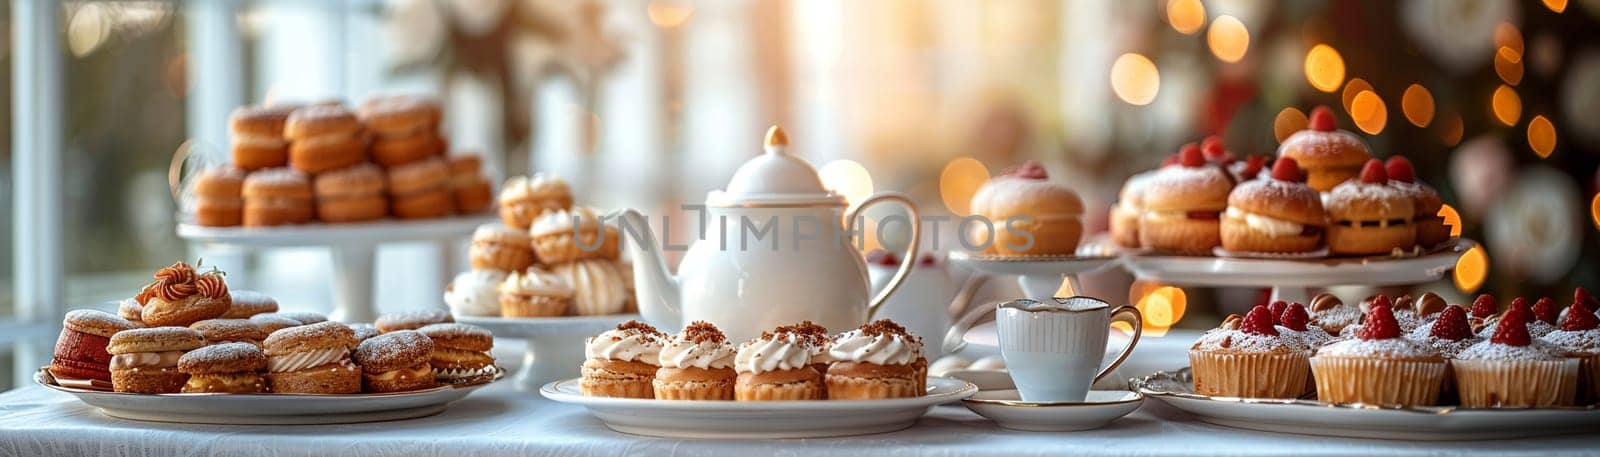 Elegant afternoon tea setup with teapot and pastries, representing leisure and luxury.